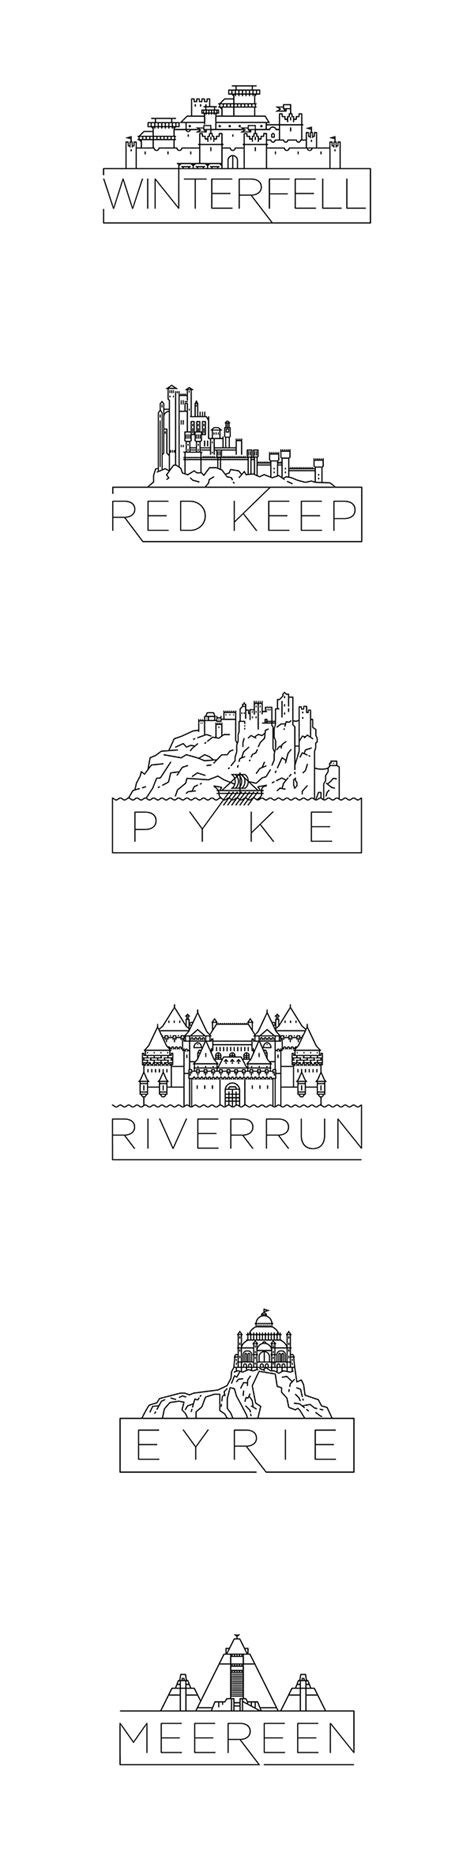 Minimal Game of Thrones Castles | Game of thrones castles, Game of thrones tattoo, Game of ...